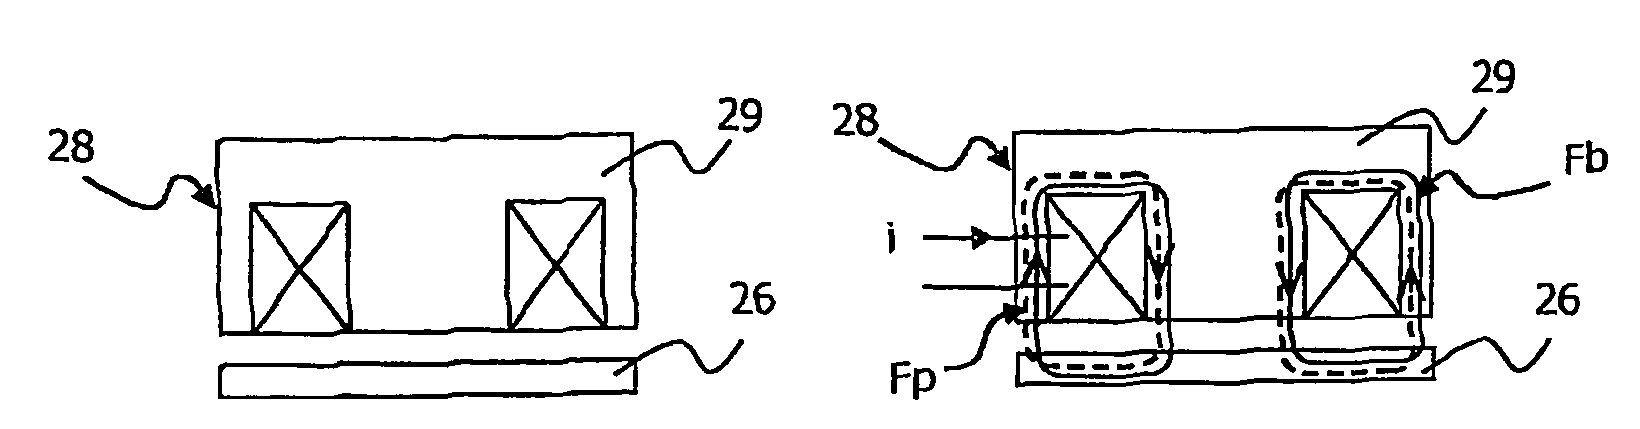 Electromagnet-equipped control device for an internal combustion engine valve